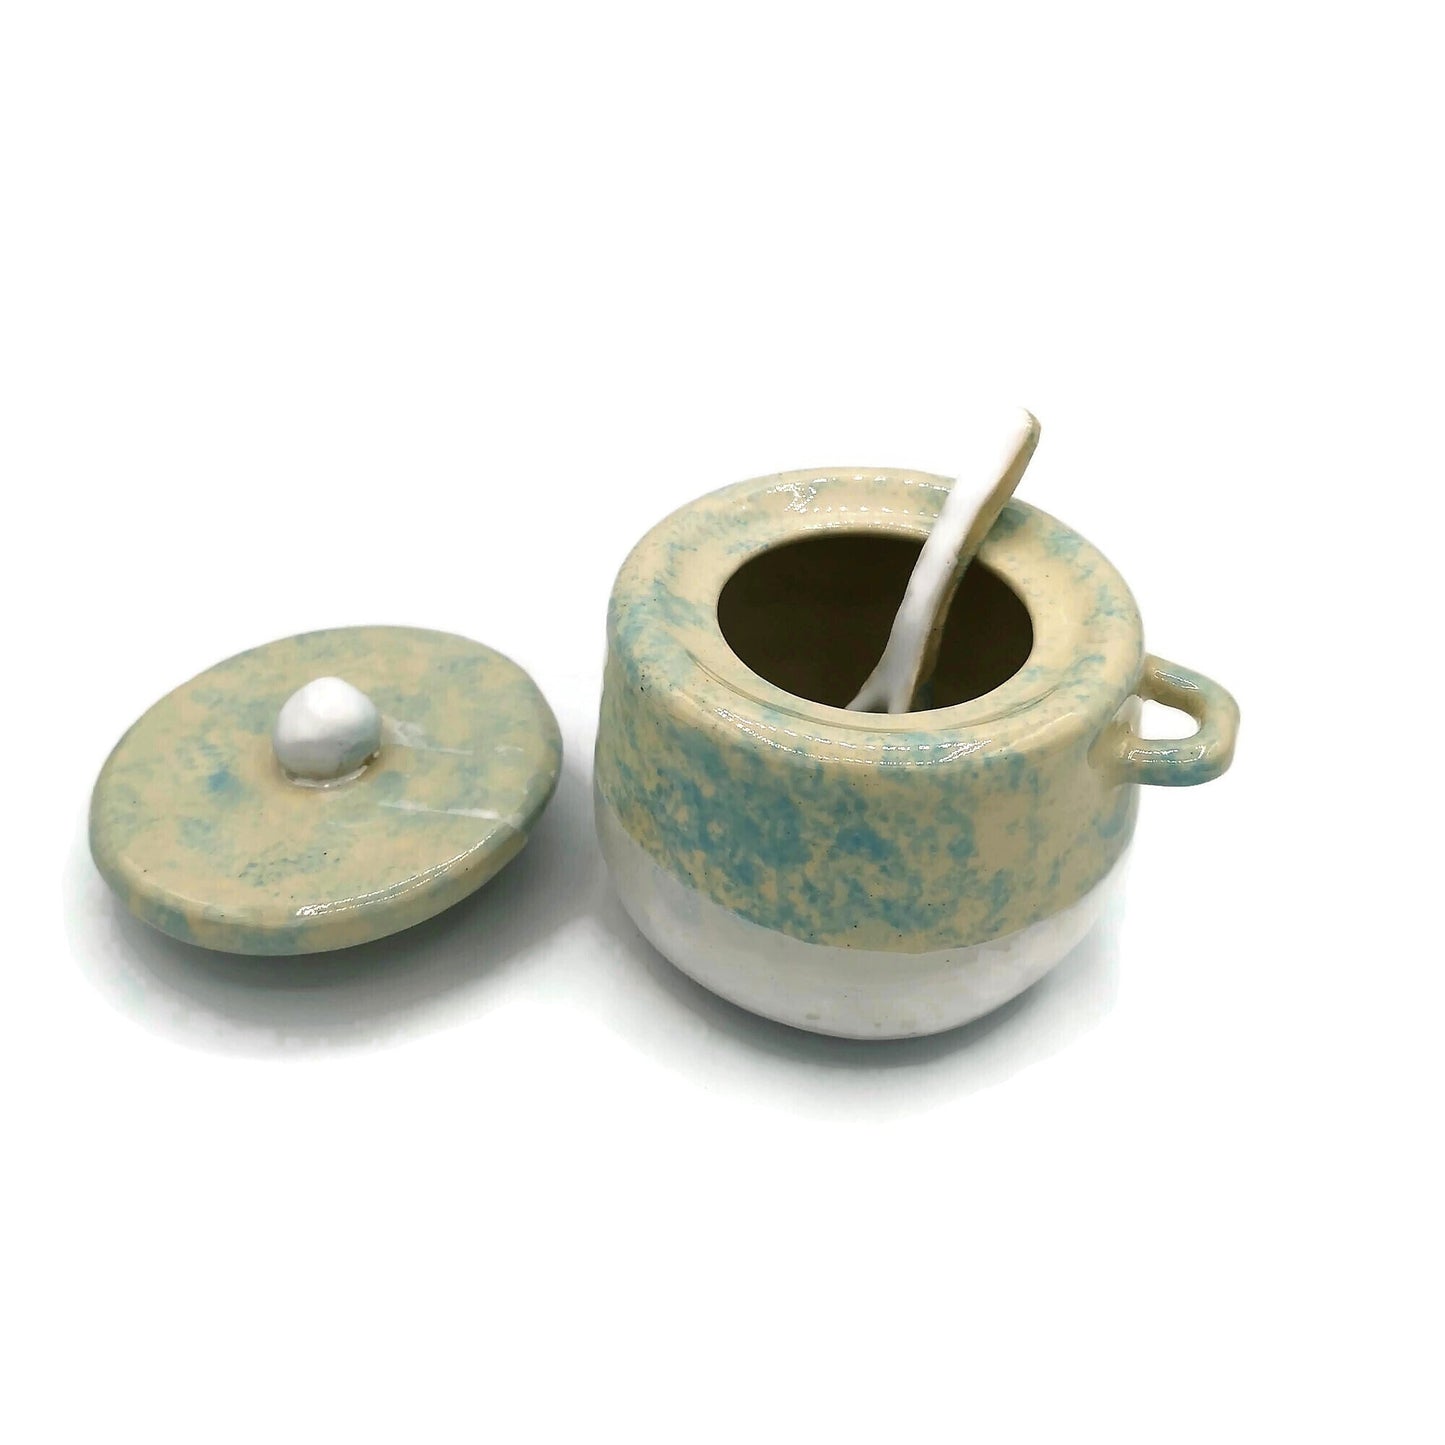 STONEWARE SUGAR BOWL With Lid And Spoon, Modern Ceramic Salt Bowl, Housewarming Gift First Home, Mothers Day Gift From Daughter, Sugar Jar - Ceramica Ana Rafael